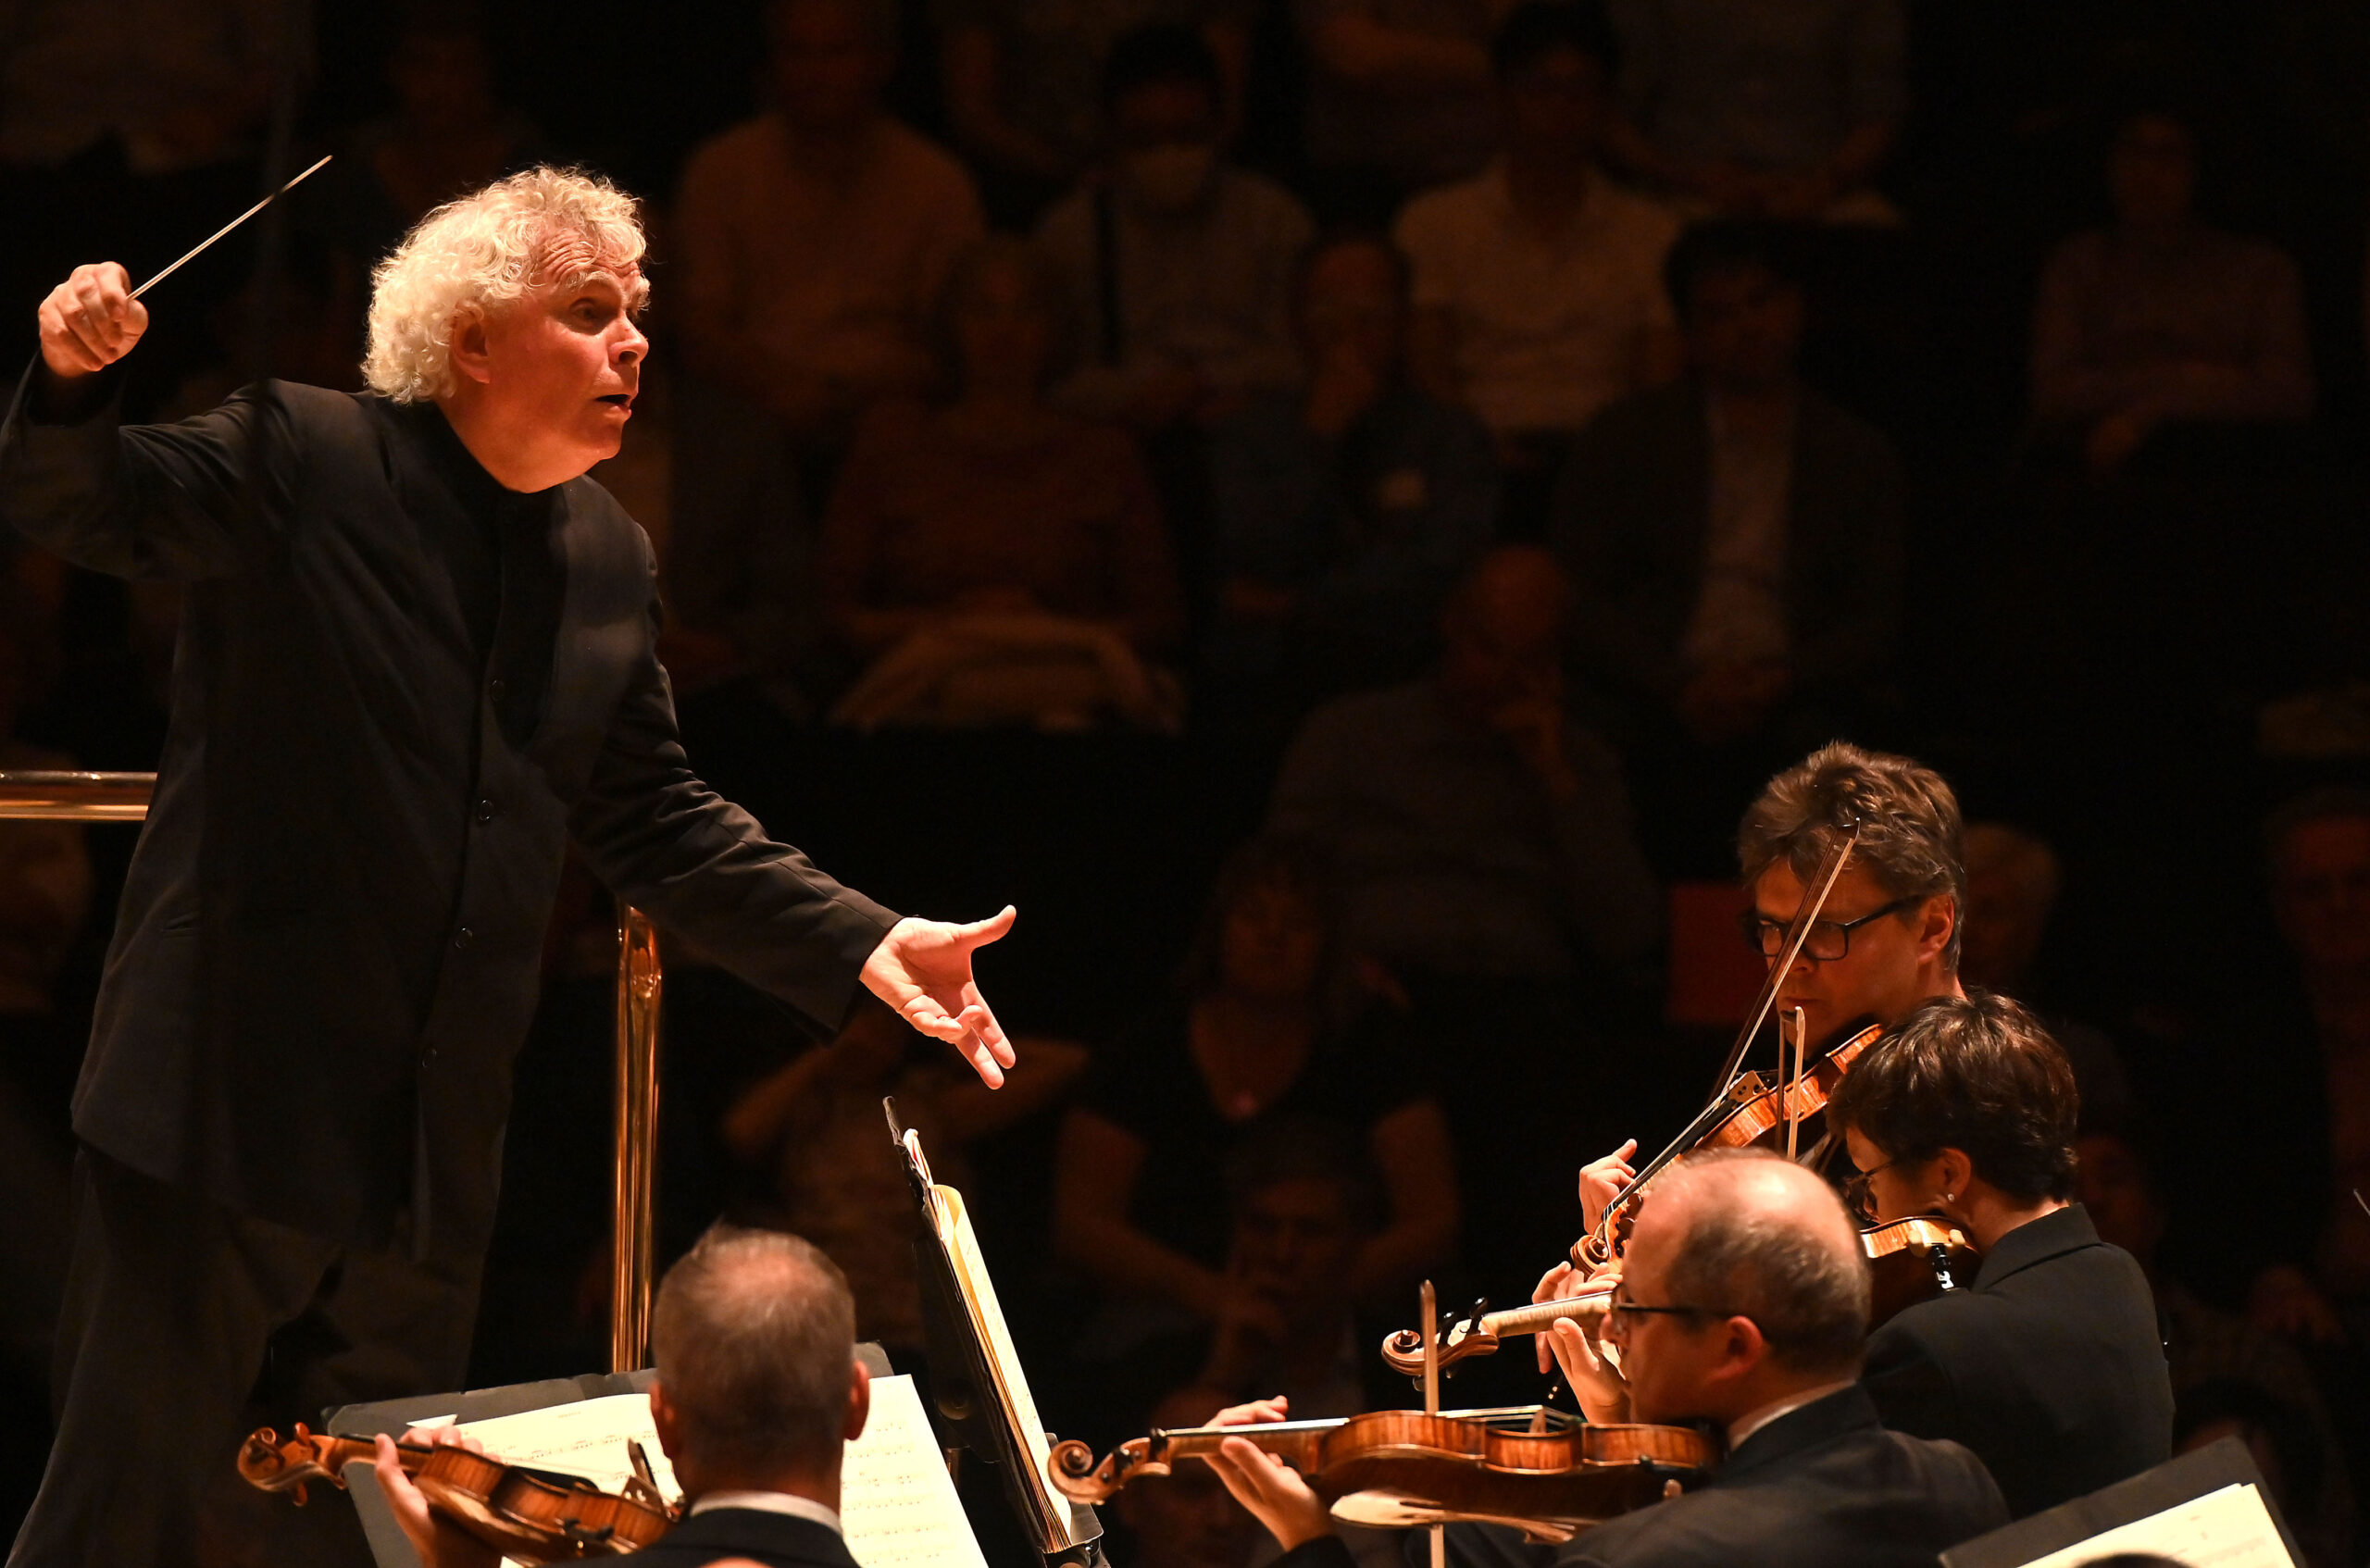 The London Symphony Orchestra conducted by Sir Simon Rattle (Leila Josefowicz: violin) launch their 2019–20 season with an all-British programme of music (Emily Howard Antisphere (world premiere, Barbican commission), Colin Matthews Violin Concerto, Walton Symphony No 1) in the Barbican Hall on Saturday, 14 Sept. 2019. Photo by Mark Allan